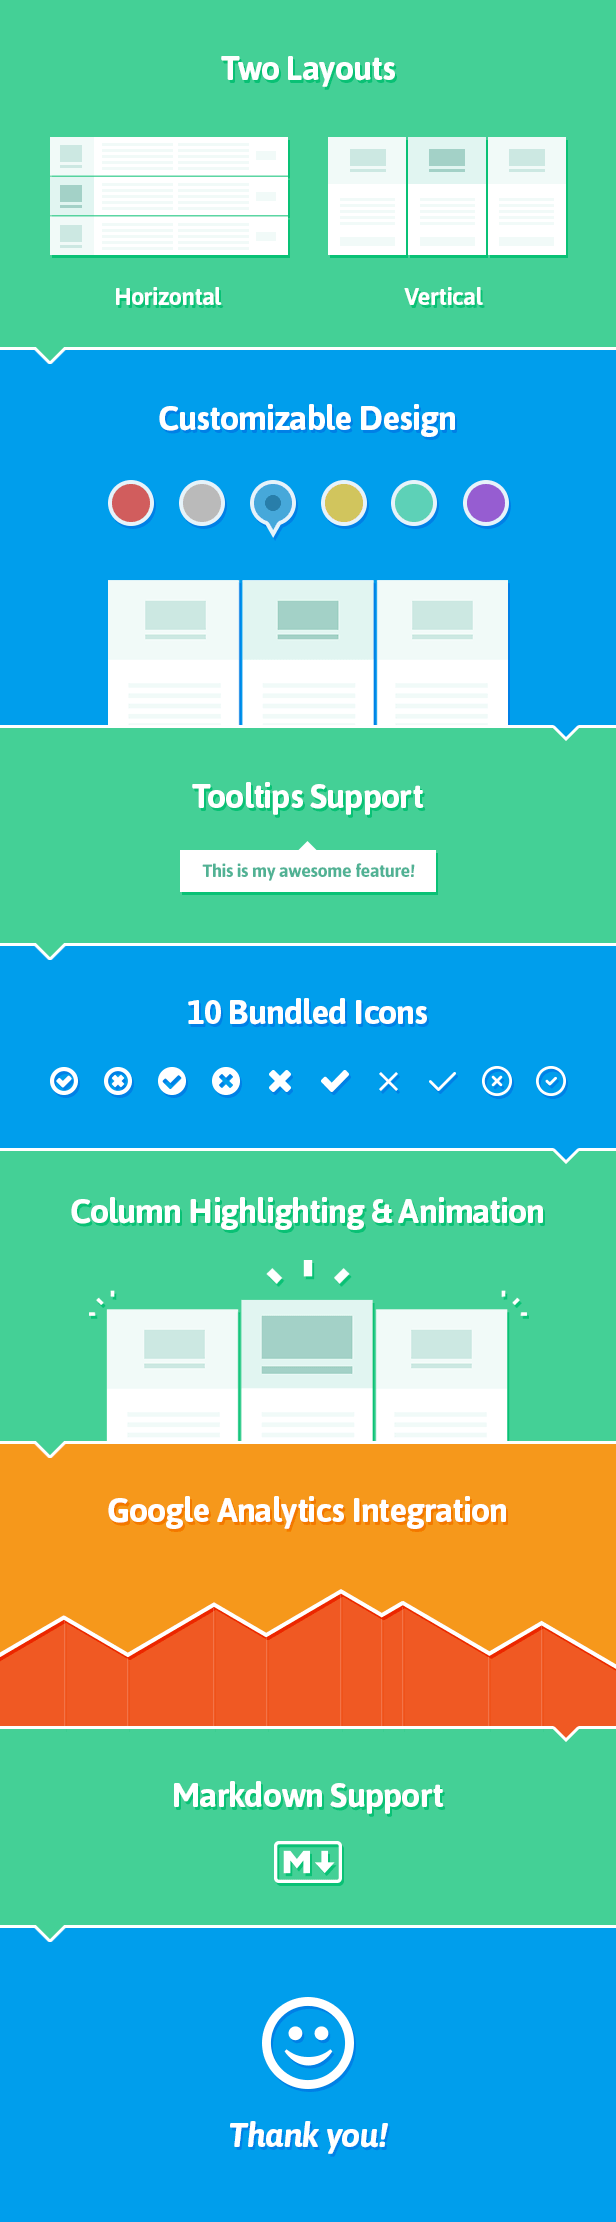 Layers Pricing Table Extension Features, Two Layouts, Customizable Design, Tooltips Support, 10 Bundled Icons, Column Highlighting and Animation, Google Analytics integration and Markdown Support.